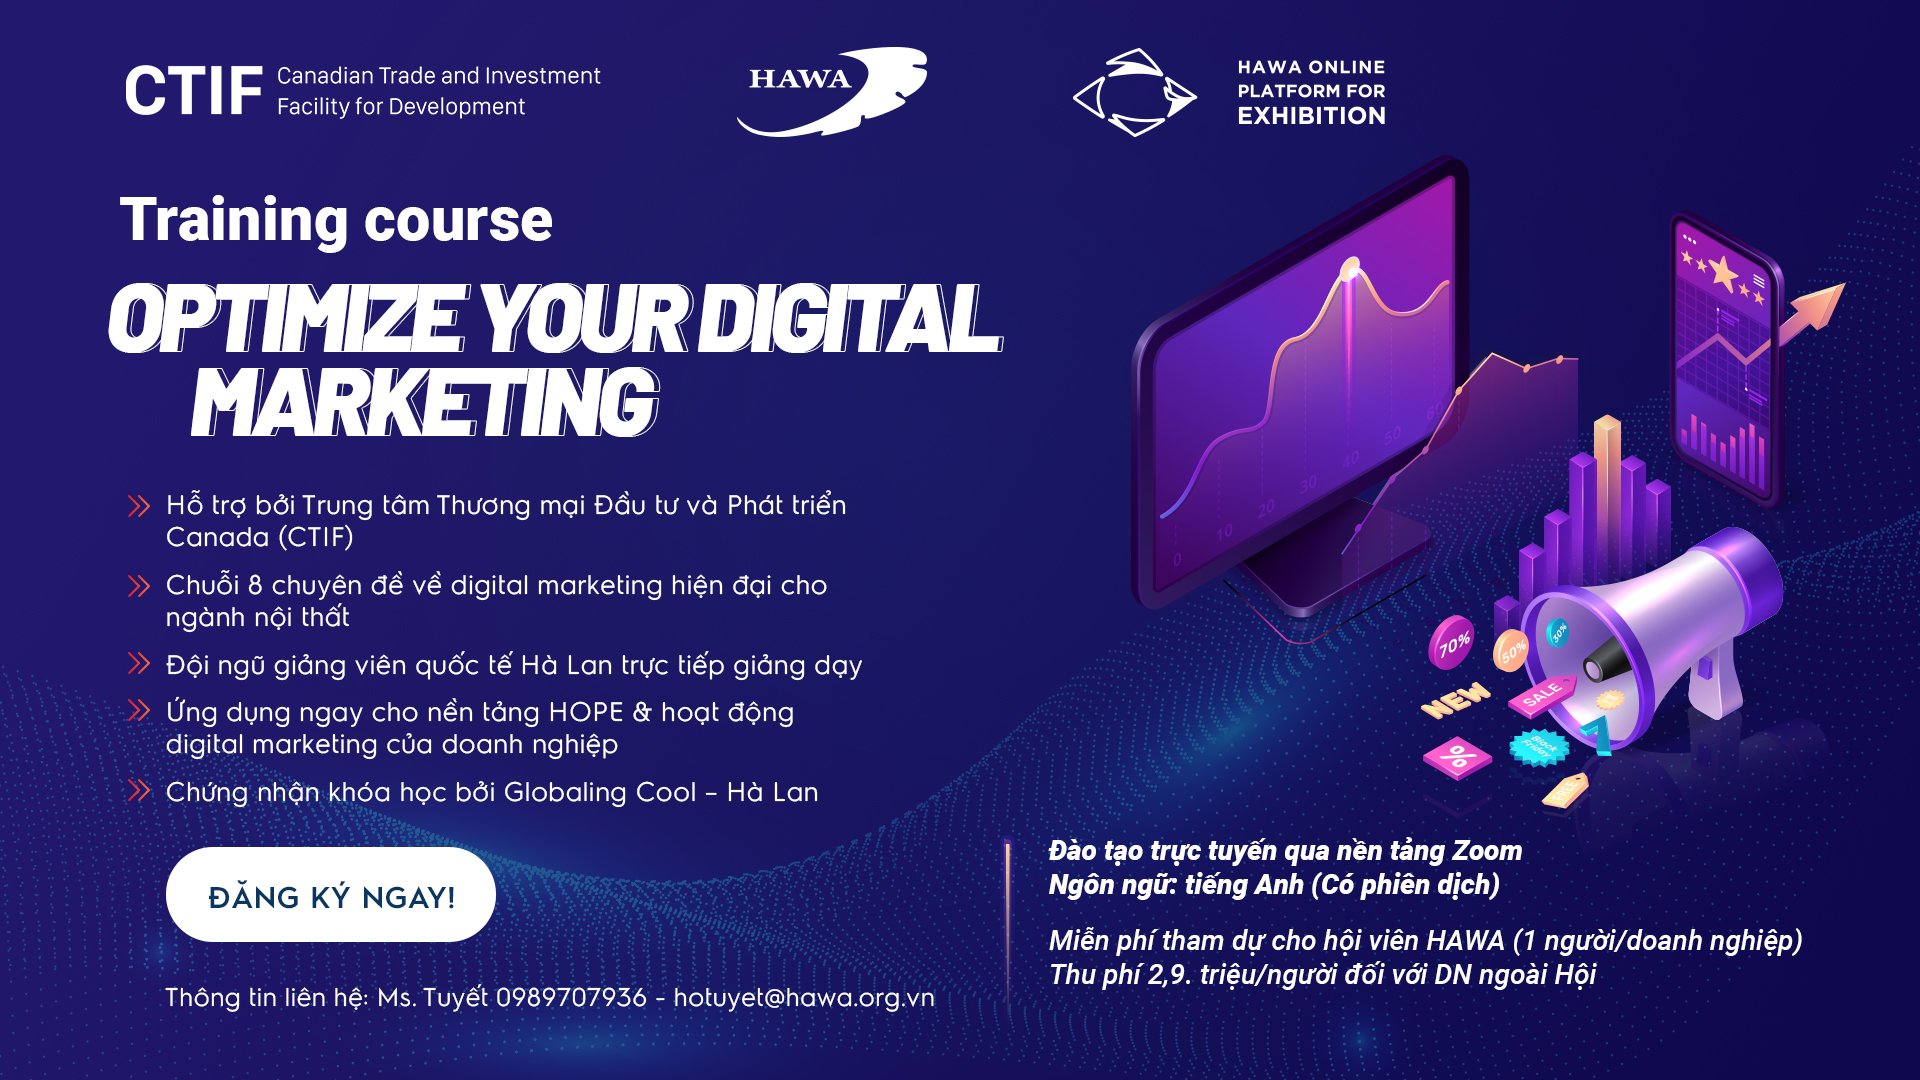 E-learning course “Optimize Your Digital Marketing” for Vietnam manufacturers